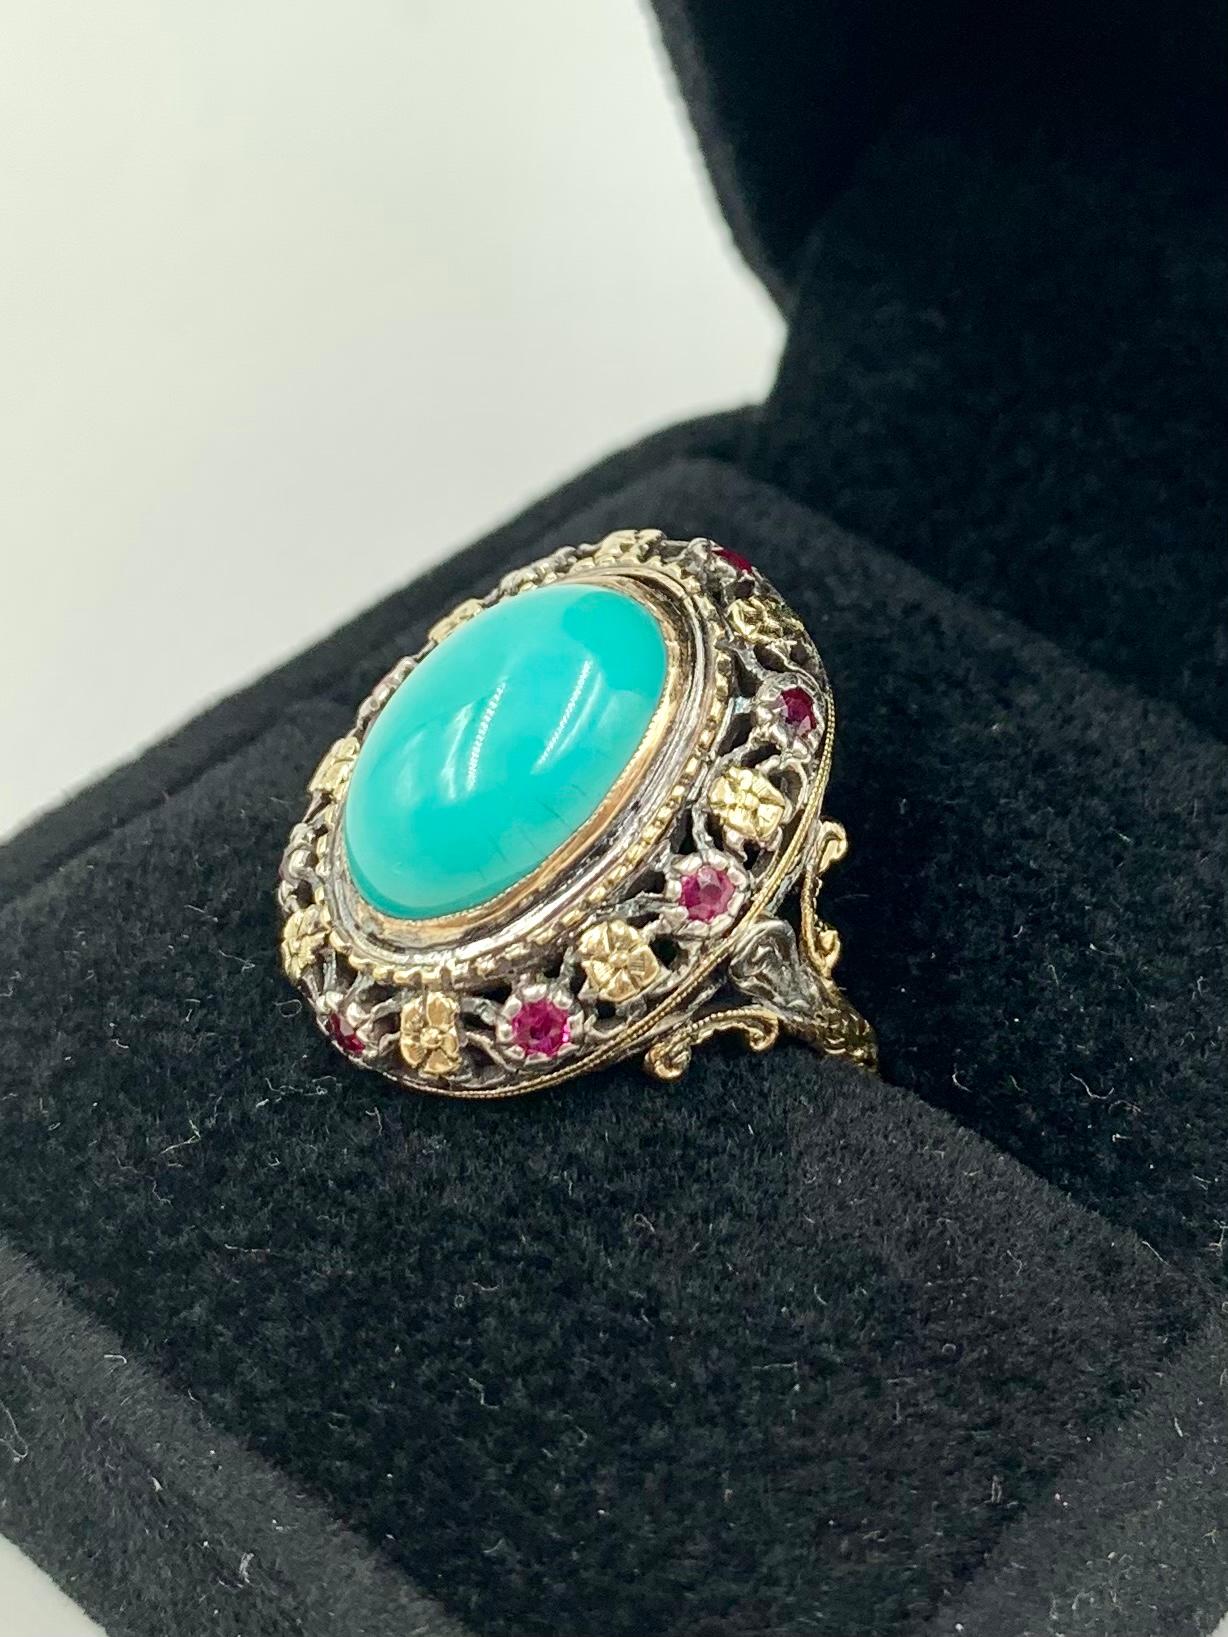 Beautiful antique Renaissance style 18K gold ring featuring a fine large oval natural Persian cabochon turquoise gem exquisitely set in a floral filigree setting composed of eight yellow gold flowers and eight white gold flowers with ruby centers.